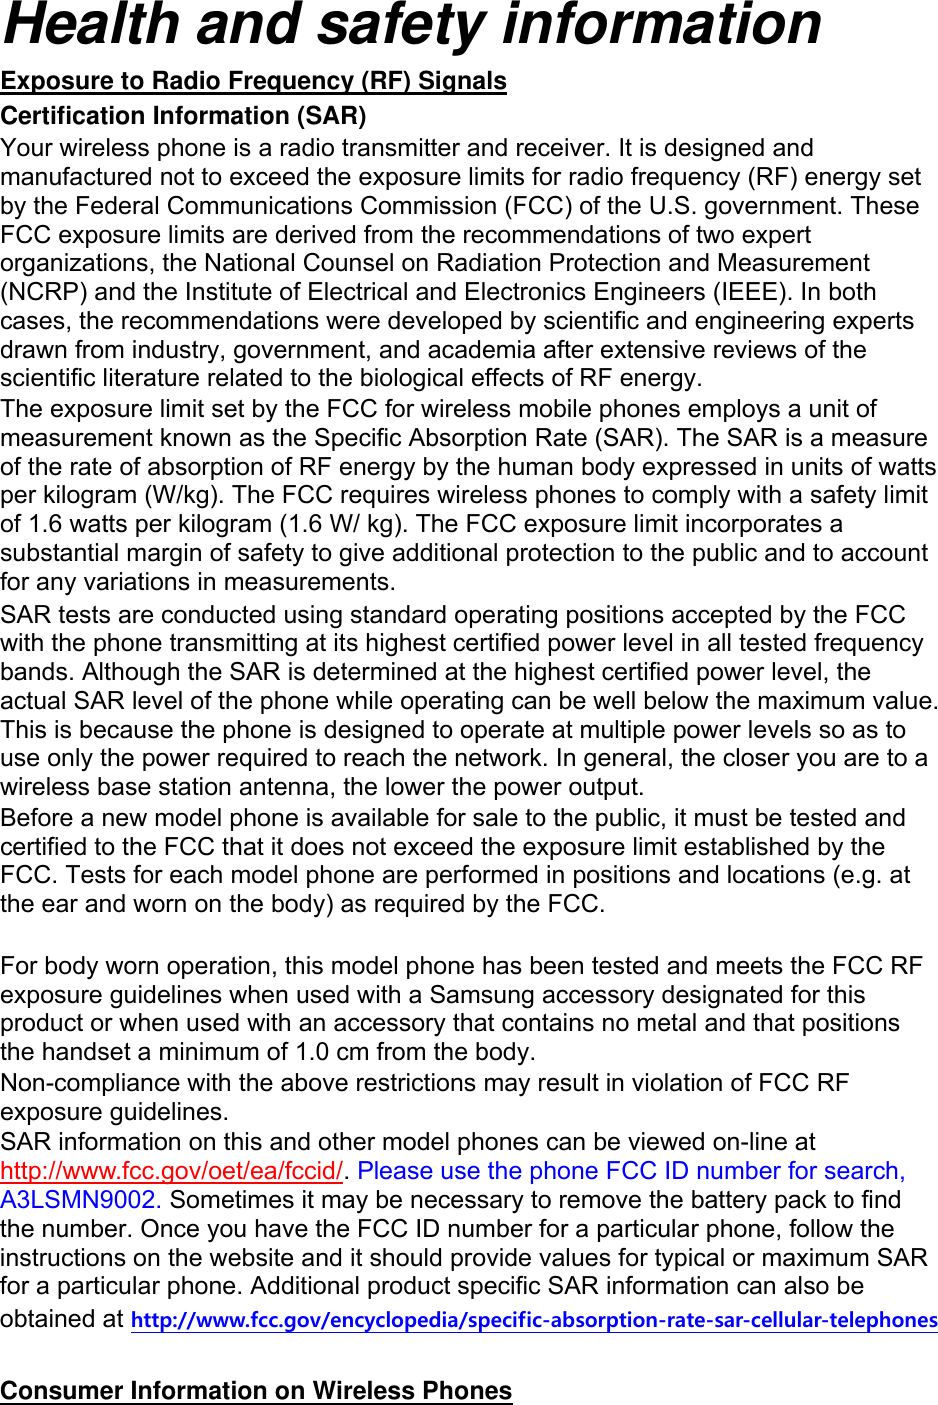 Health and safety information Exposure to Radio Frequency (RF) Signals Certification Information (SAR) Your wireless phone is a radio transmitter and receiver. It is designed and manufactured not to exceed the exposure limits for radio frequency (RF) energy set by the Federal Communications Commission (FCC) of the U.S. government. These FCC exposure limits are derived from the recommendations of two expert organizations, the National Counsel on Radiation Protection and Measurement (NCRP) and the Institute of Electrical and Electronics Engineers (IEEE). In both cases, the recommendations were developed by scientific and engineering experts drawn from industry, government, and academia after extensive reviews of the scientific literature related to the biological effects of RF energy. The exposure limit set by the FCC for wireless mobile phones employs a unit of measurement known as the Specific Absorption Rate (SAR). The SAR is a measure of the rate of absorption of RF energy by the human body expressed in units of watts per kilogram (W/kg). The FCC requires wireless phones to comply with a safety limit of 1.6 watts per kilogram (1.6 W/ kg). The FCC exposure limit incorporates a substantial margin of safety to give additional protection to the public and to account for any variations in measurements. SAR tests are conducted using standard operating positions accepted by the FCC with the phone transmitting at its highest certified power level in all tested frequency bands. Although the SAR is determined at the highest certified power level, the actual SAR level of the phone while operating can be well below the maximum value. This is because the phone is designed to operate at multiple power levels so as to use only the power required to reach the network. In general, the closer you are to a wireless base station antenna, the lower the power output. Before a new model phone is available for sale to the public, it must be tested and certified to the FCC that it does not exceed the exposure limit established by the FCC. Tests for each model phone are performed in positions and locations (e.g. at the ear and worn on the body) as required by the FCC.      For body worn operation, this model phone has been tested and meets the FCC RF exposure guidelines when used with a Samsung accessory designated for this product or when used with an accessory that contains no metal and that positions the handset a minimum of 1.0 cm from the body.   Non-compliance with the above restrictions may result in violation of FCC RF exposure guidelines. SAR information on this and other model phones can be viewed on-line at http://www.fcc.gov/oet/ea/fccid/. Please use the phone FCC ID number for search, A3LSMN9002. Sometimes it may be necessary to remove the battery pack to find the number. Once you have the FCC ID number for a particular phone, follow the instructions on the website and it should provide values for typical or maximum SAR for a particular phone. Additional product specific SAR information can also be obtained at http://www.fcc.gov/encyclopedia/specific-absorption-rate-sar-cellular-telephones  Consumer Information on Wireless Phones 